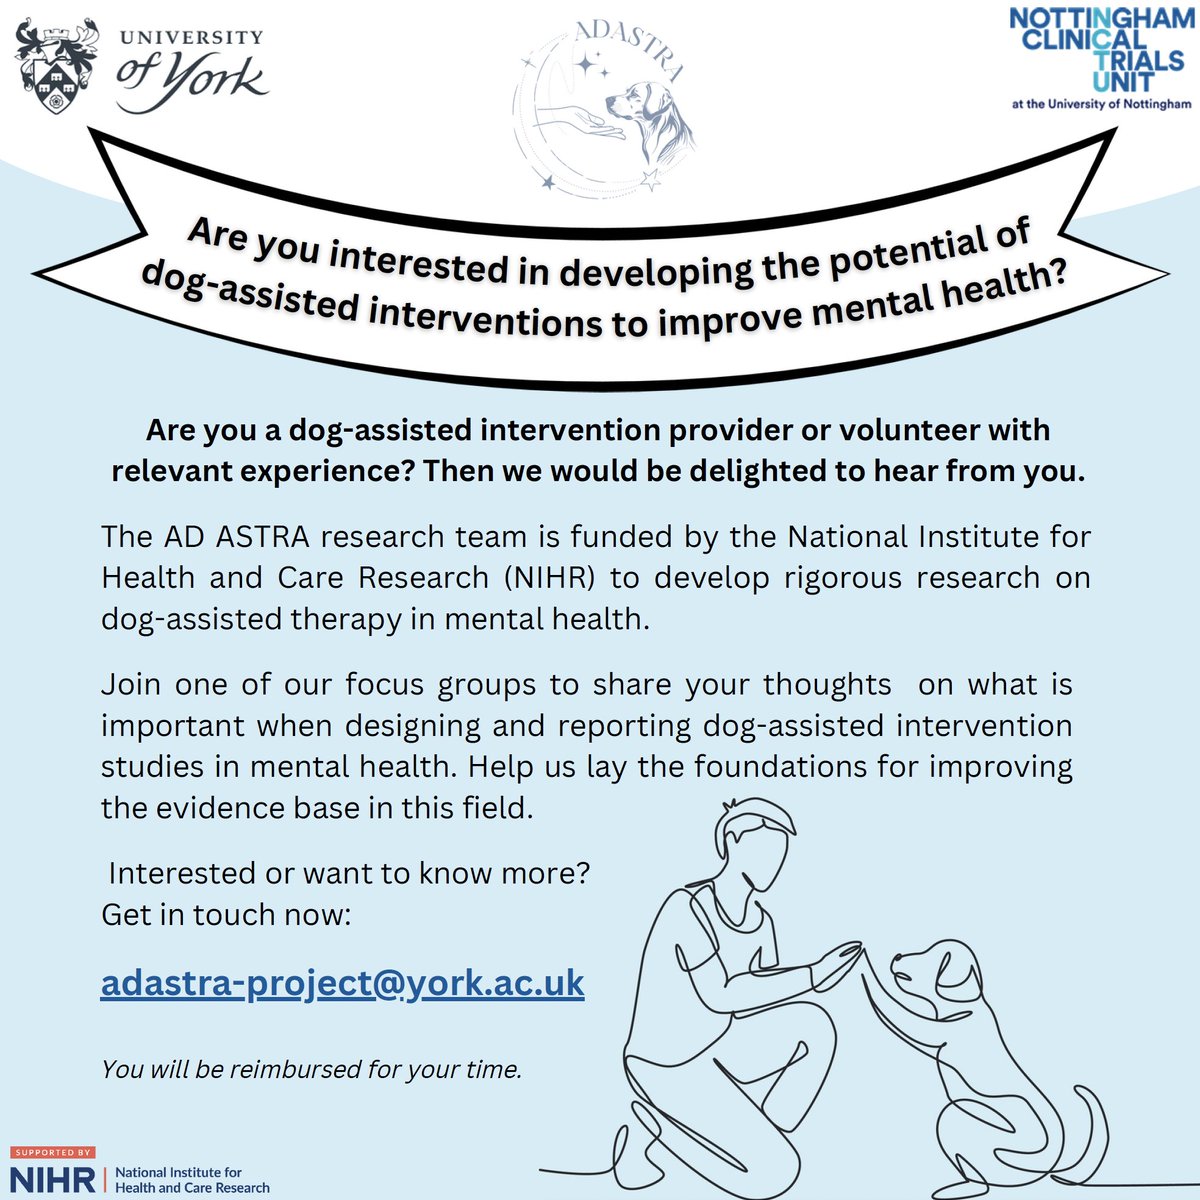 📢 RECRUITING NOW! We are looking for dog-assisted intervention (DAI) providers 🦮. We'd love to hear your thoughts on how we can improve DAI research. Email us at adastra-project@york.ac.uk to express interest! #DogAssistedIntervention #research @HumanAnimalYork